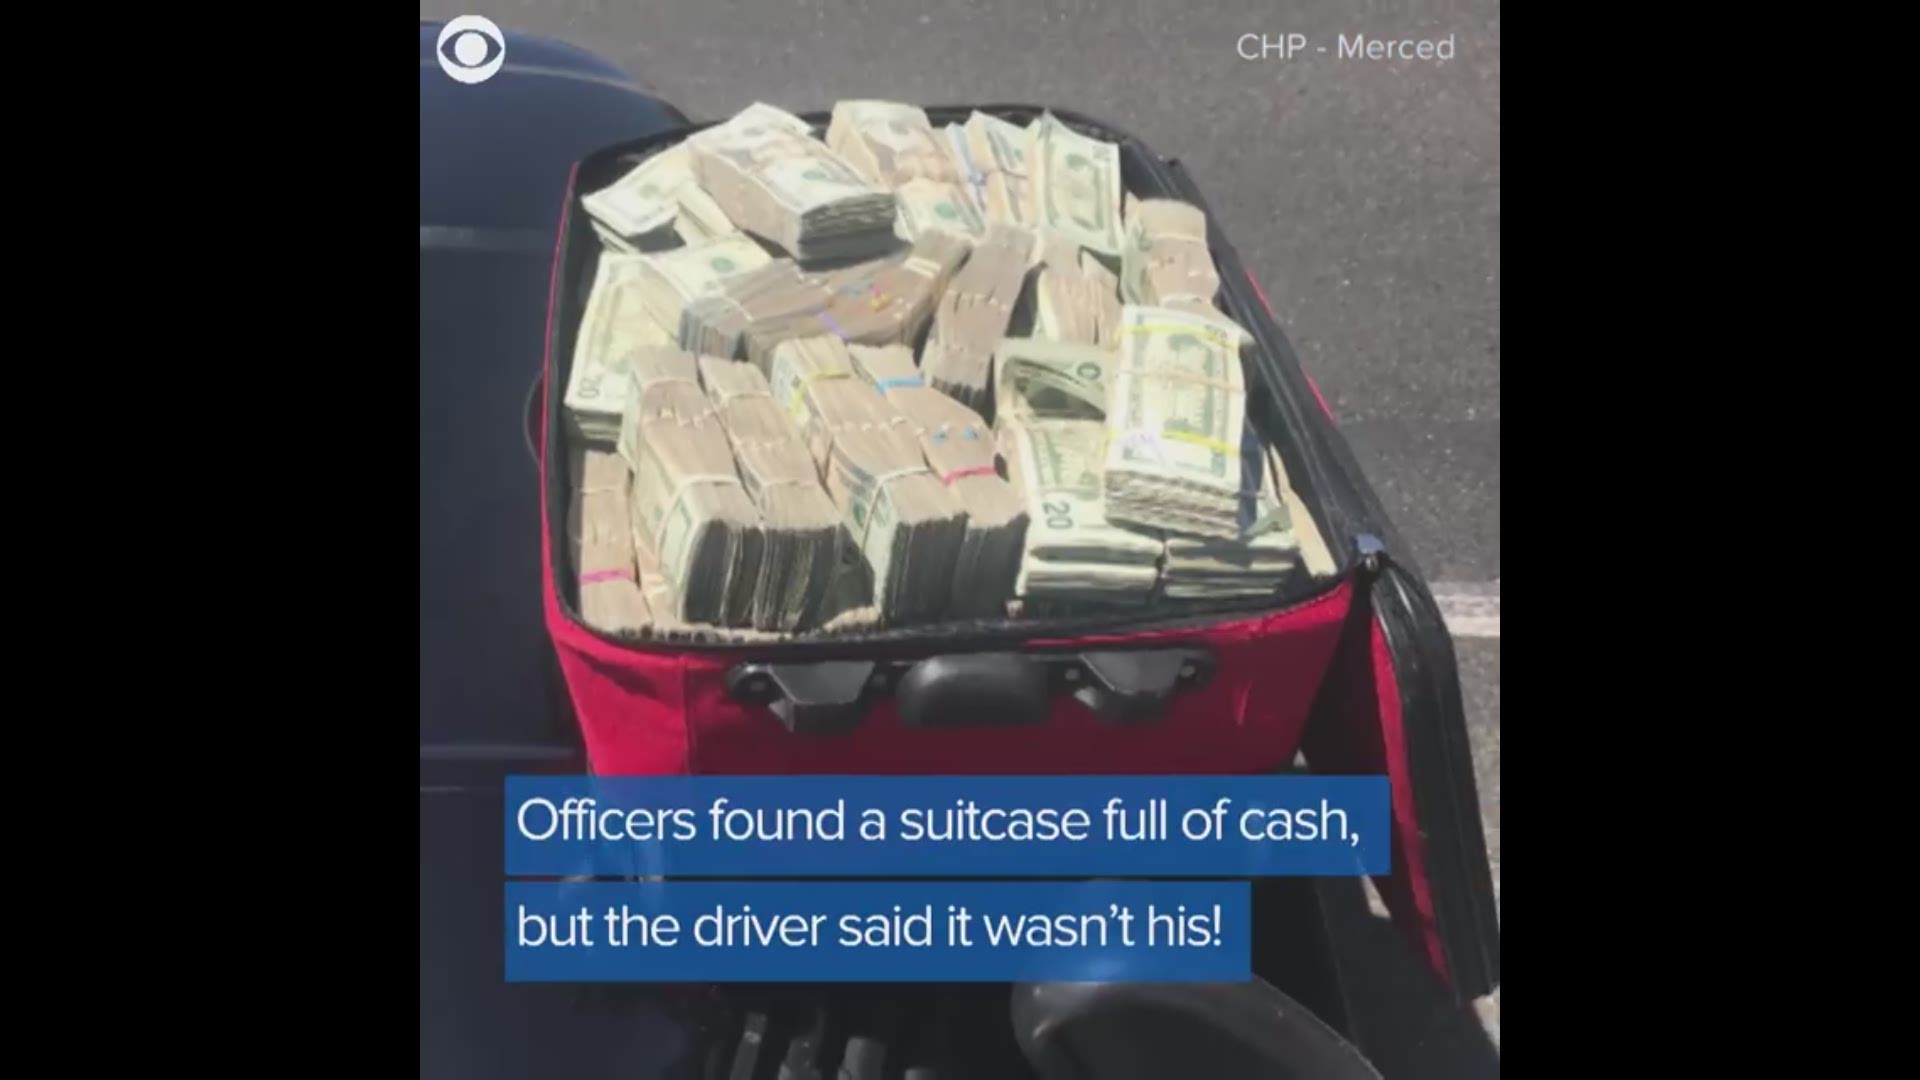 Did you lose a suitcase full of $500,000 in cash? If so, K9 officer "Bruce" just found it! Take a look at the dog's awesome discovery last month in Calif.